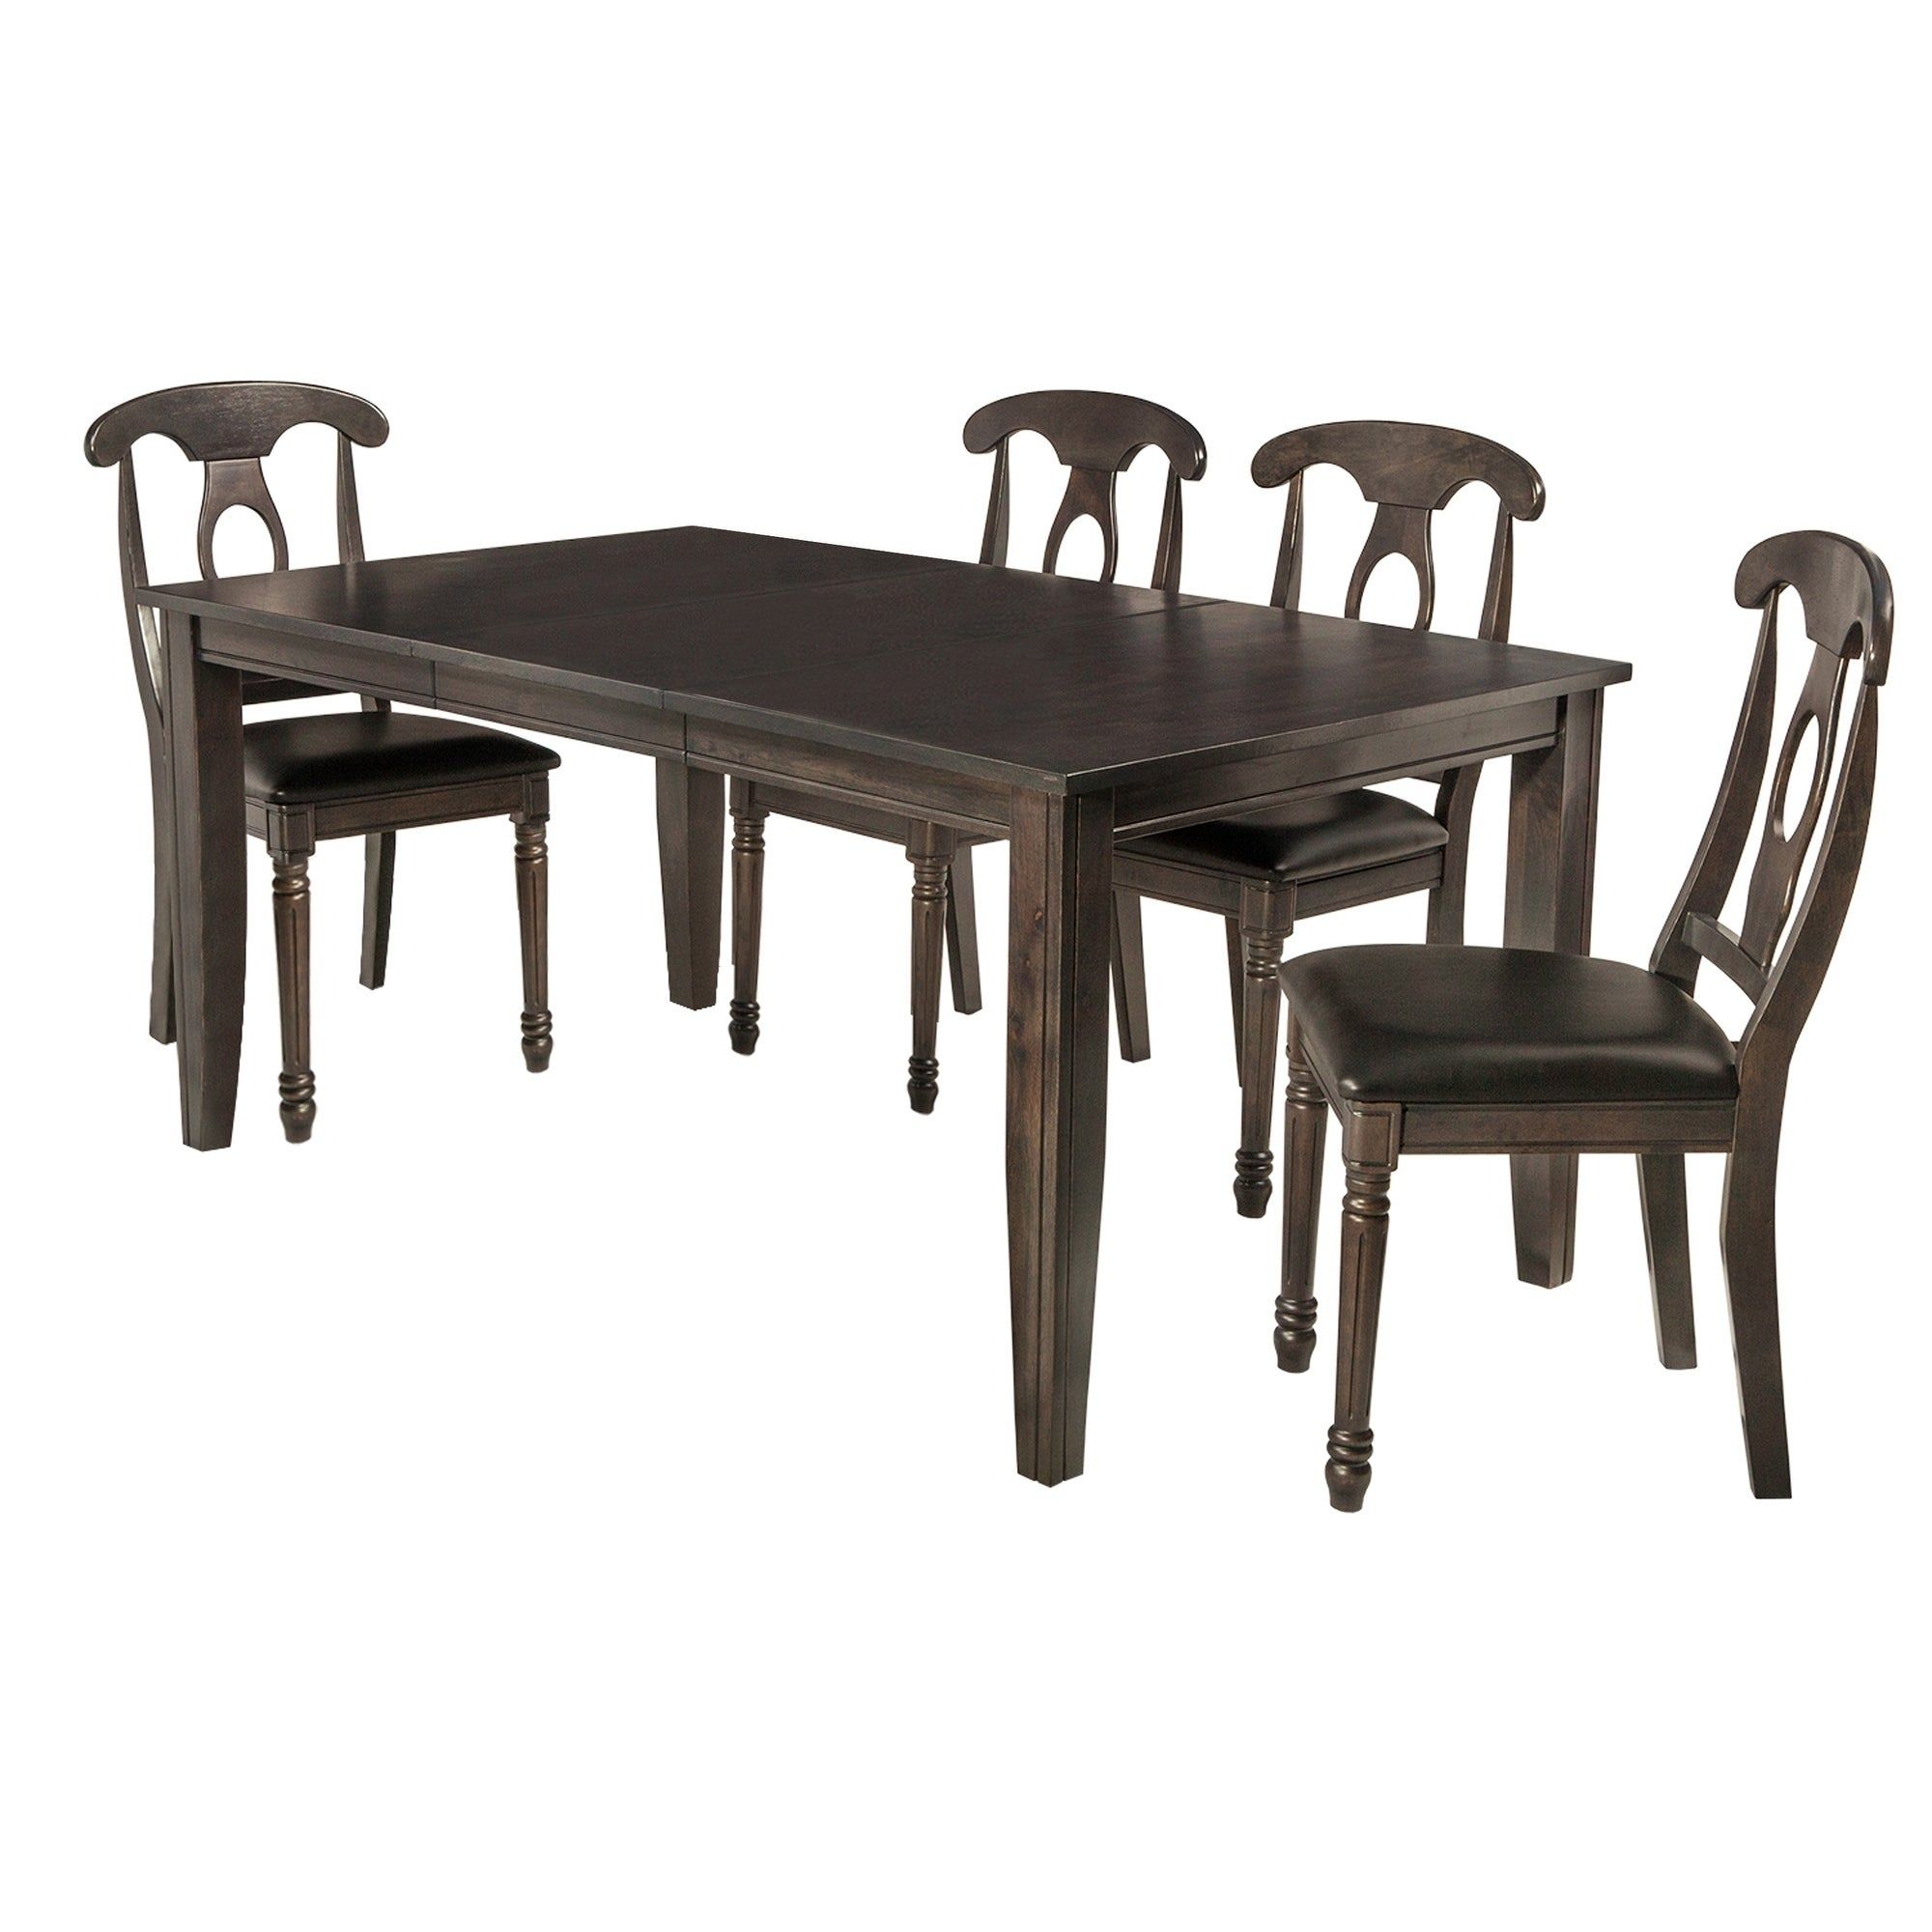 Adan 5 Piece Solid Wood Dining Sets (set Of 5) For Recent Shop 5 Piece Solid Wood Dining Set "aden", Modern Kitchen Table Set (View 6 of 20)